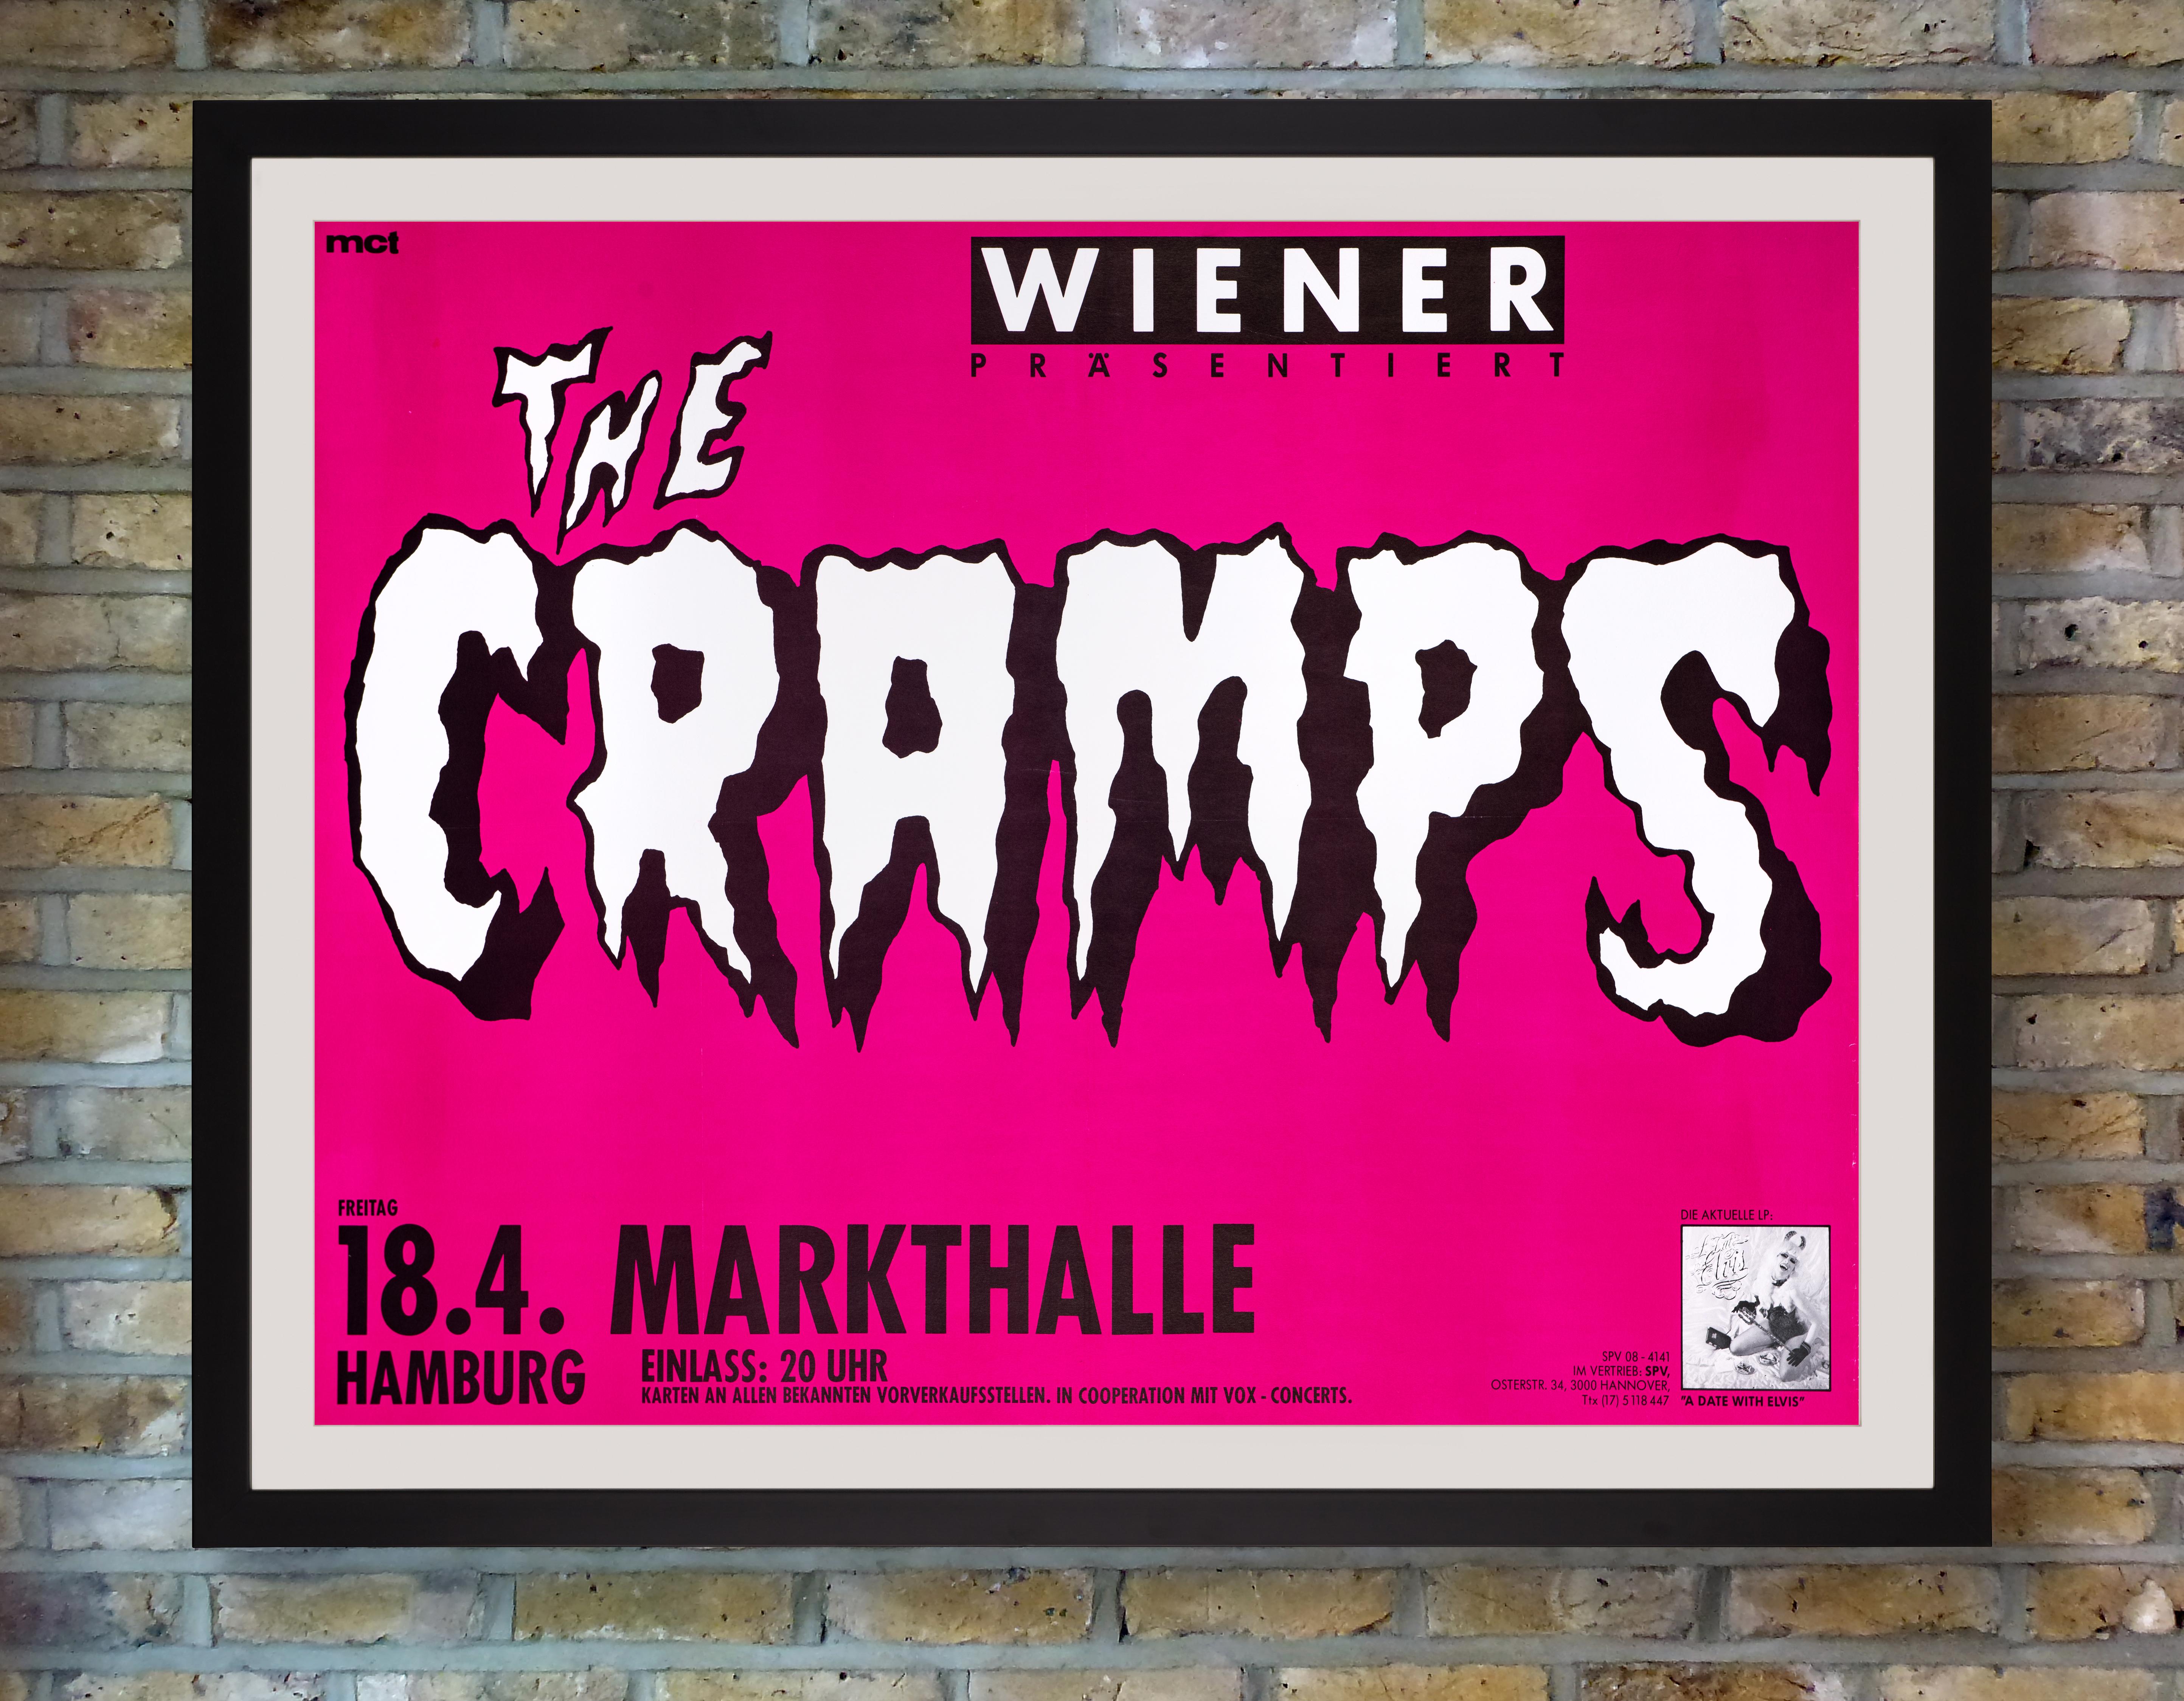 A vibrant pink poster for a performance by American garage punk band The Cramps at Markthalle, Hamburg, Germany, on 18 April 1986 in support of their third studio album 'A Date with Elvis.' Two separate bootleg recordings of this concert have been